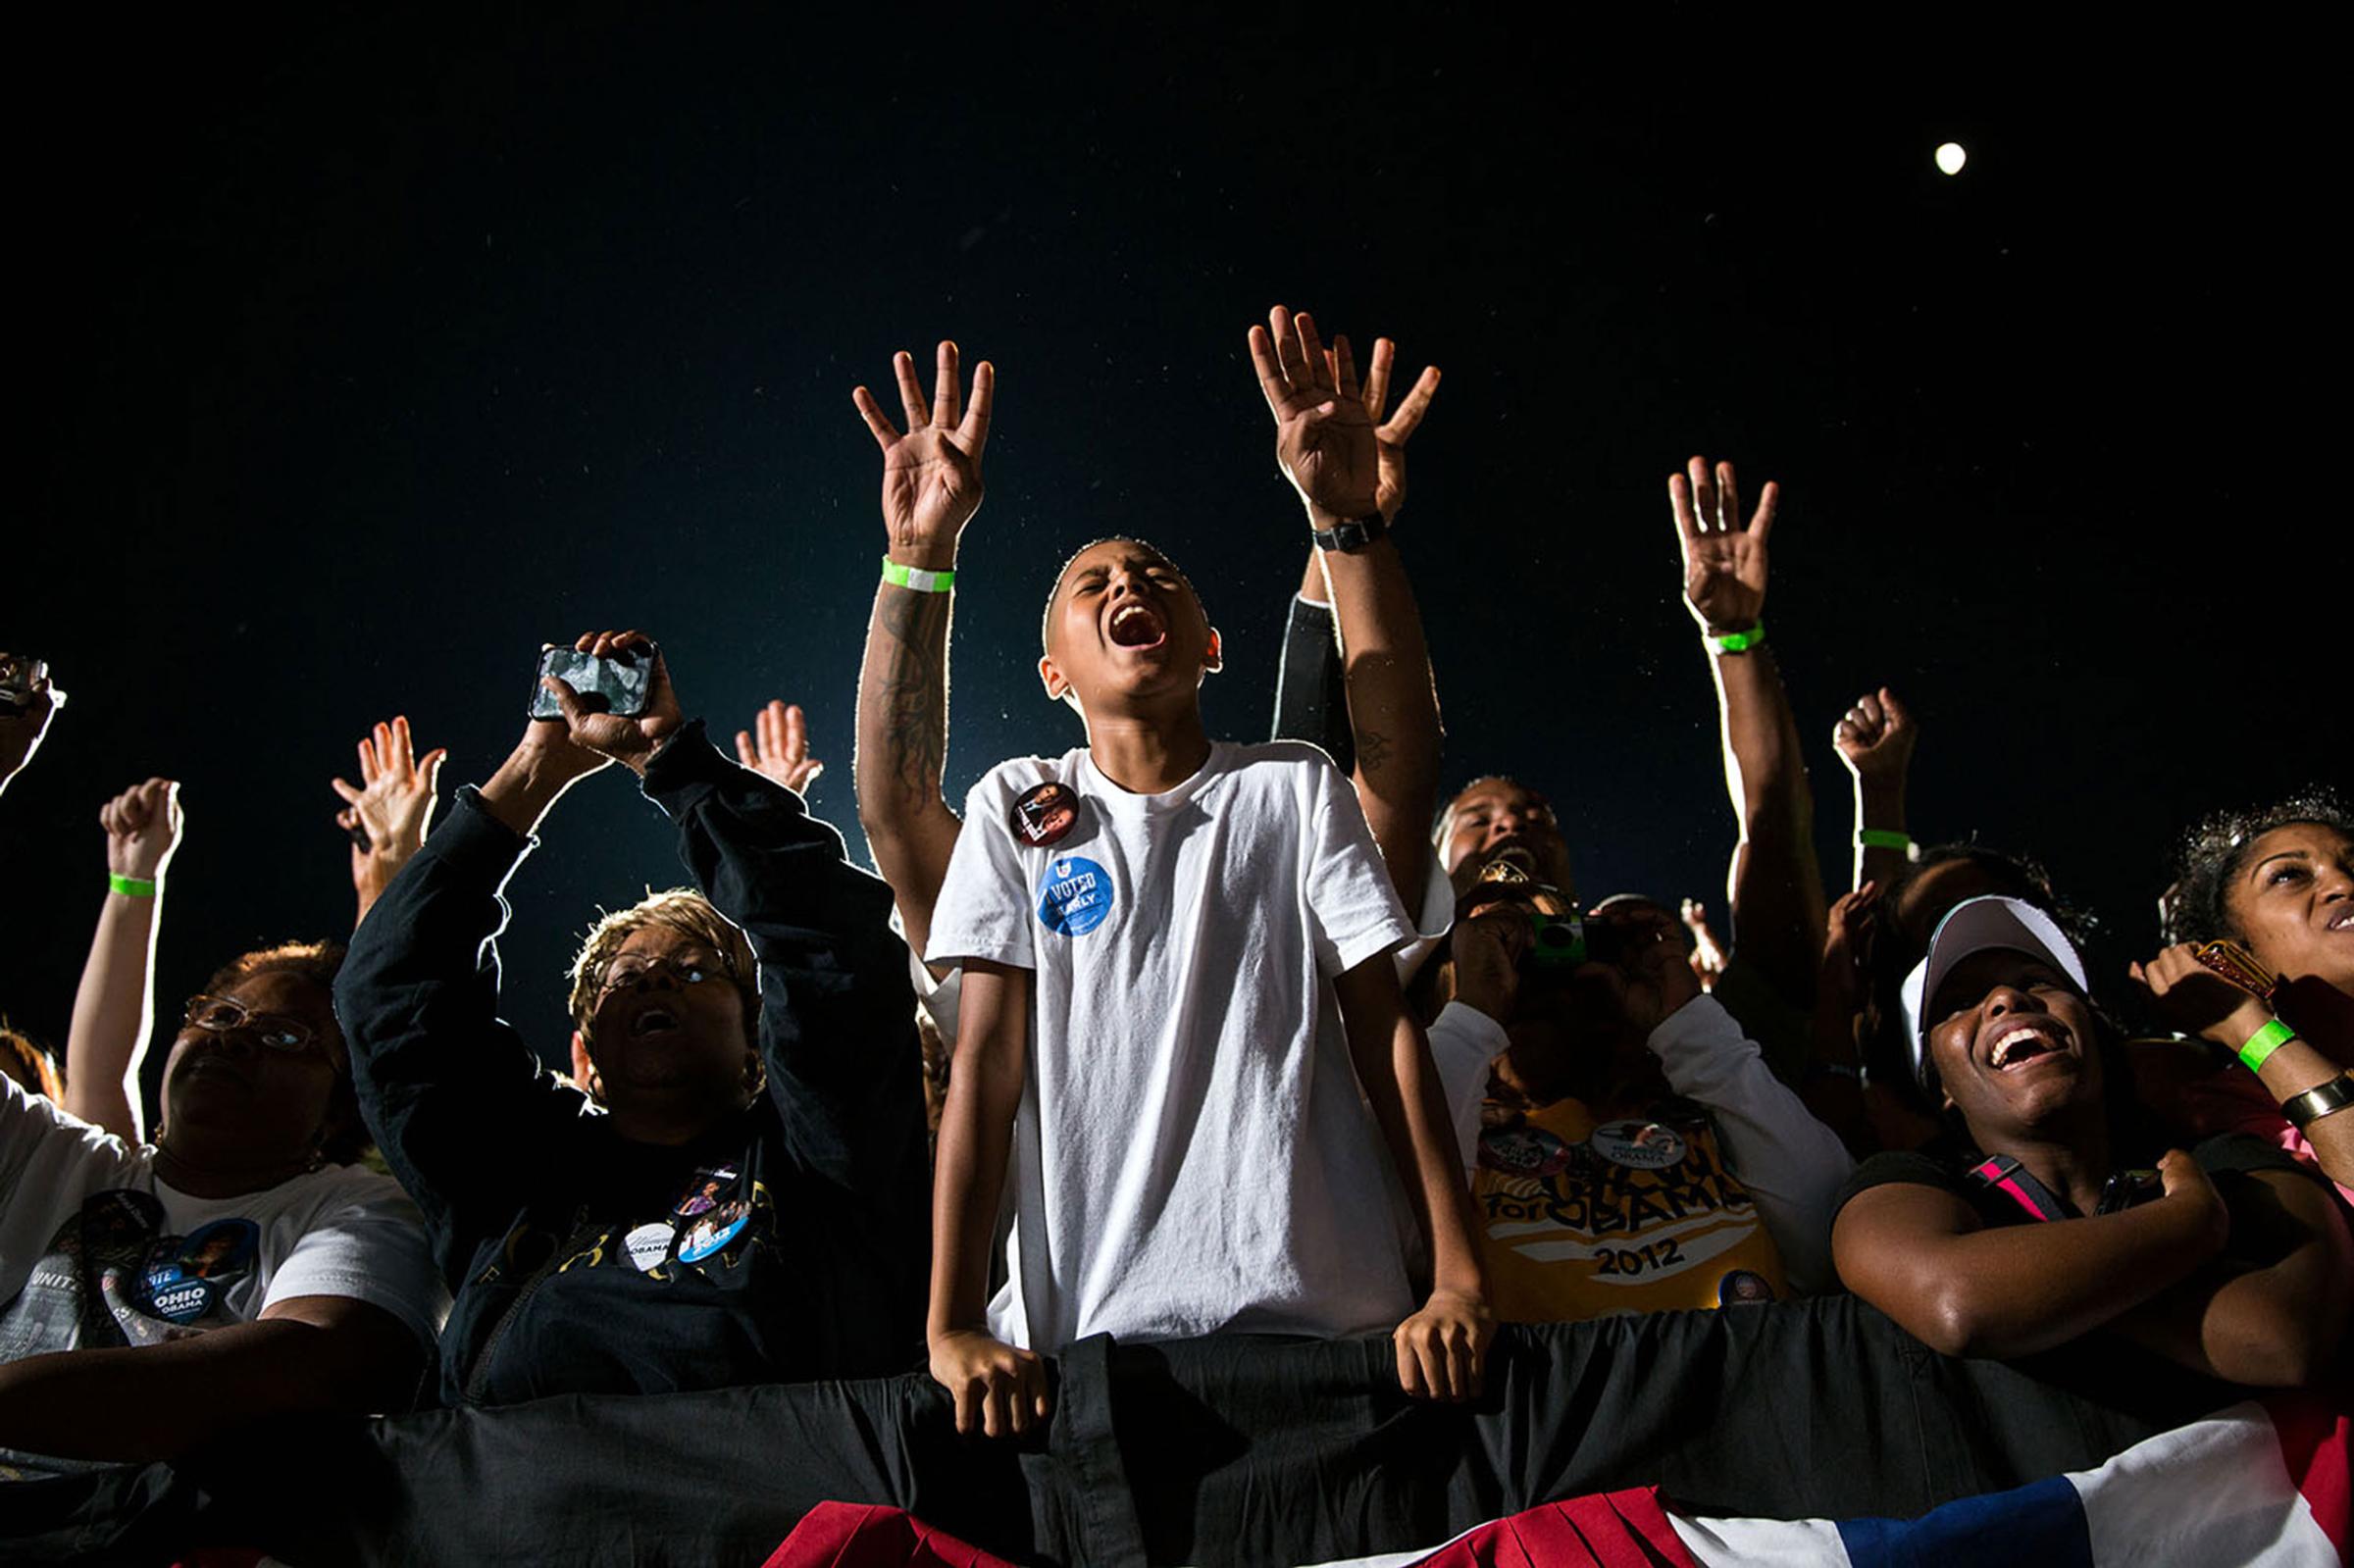 "At a late night rally in Cleveland, supporters react as the President delivered his remarks," Oct. 25,